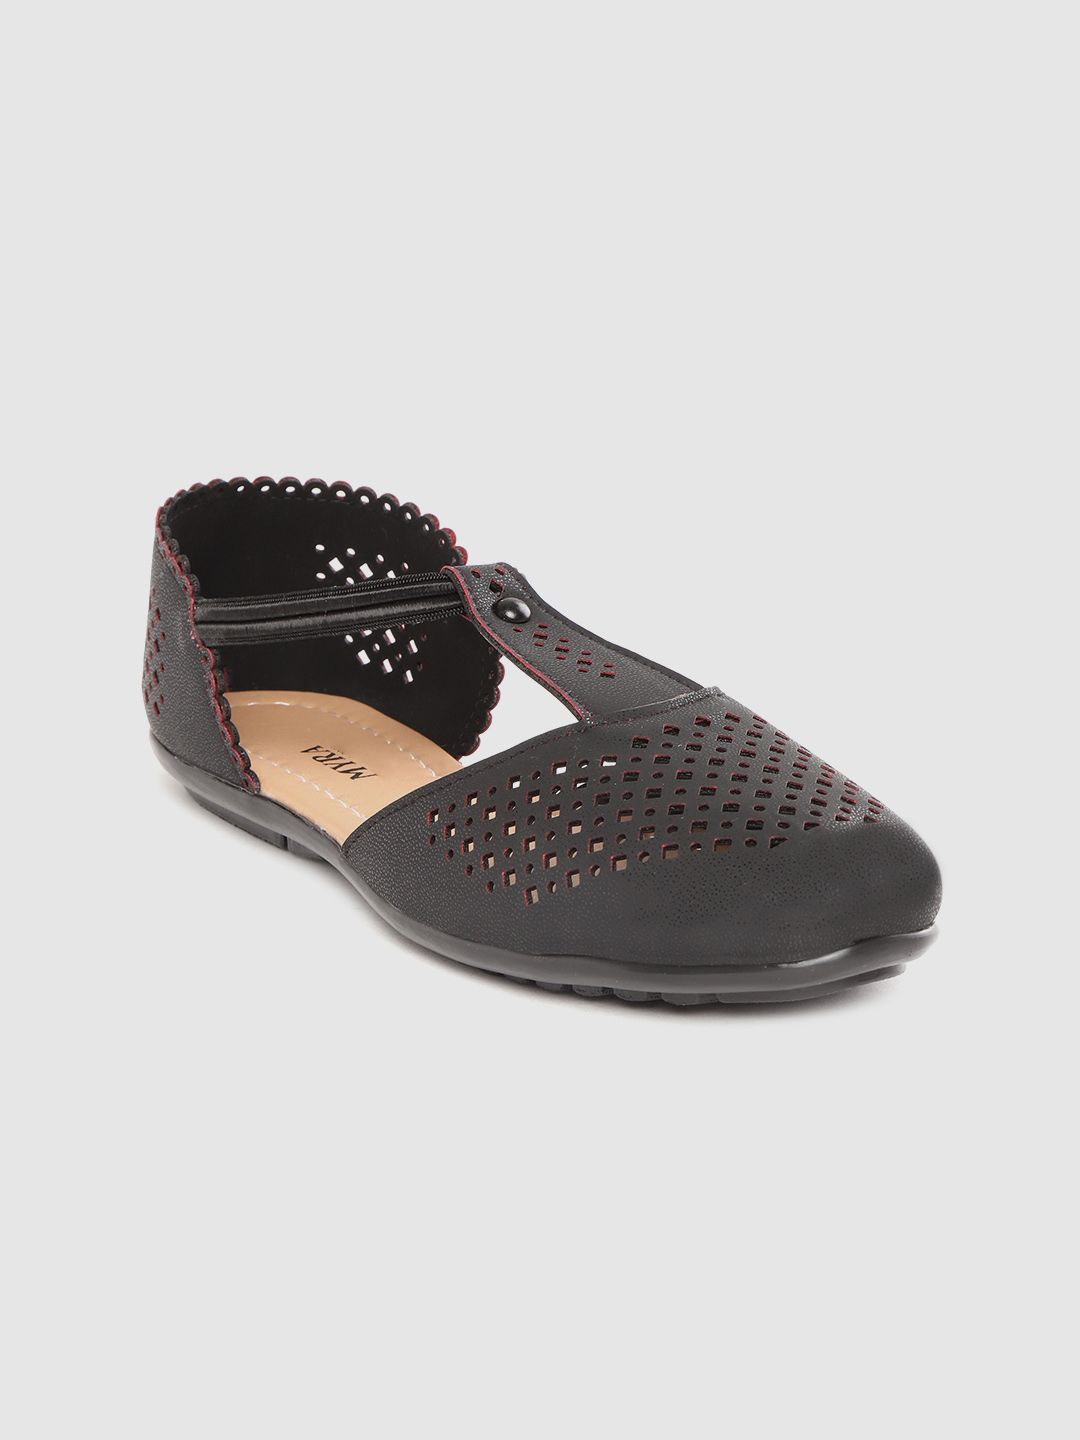 Myra Women Black Cut-Out Flats Price in India